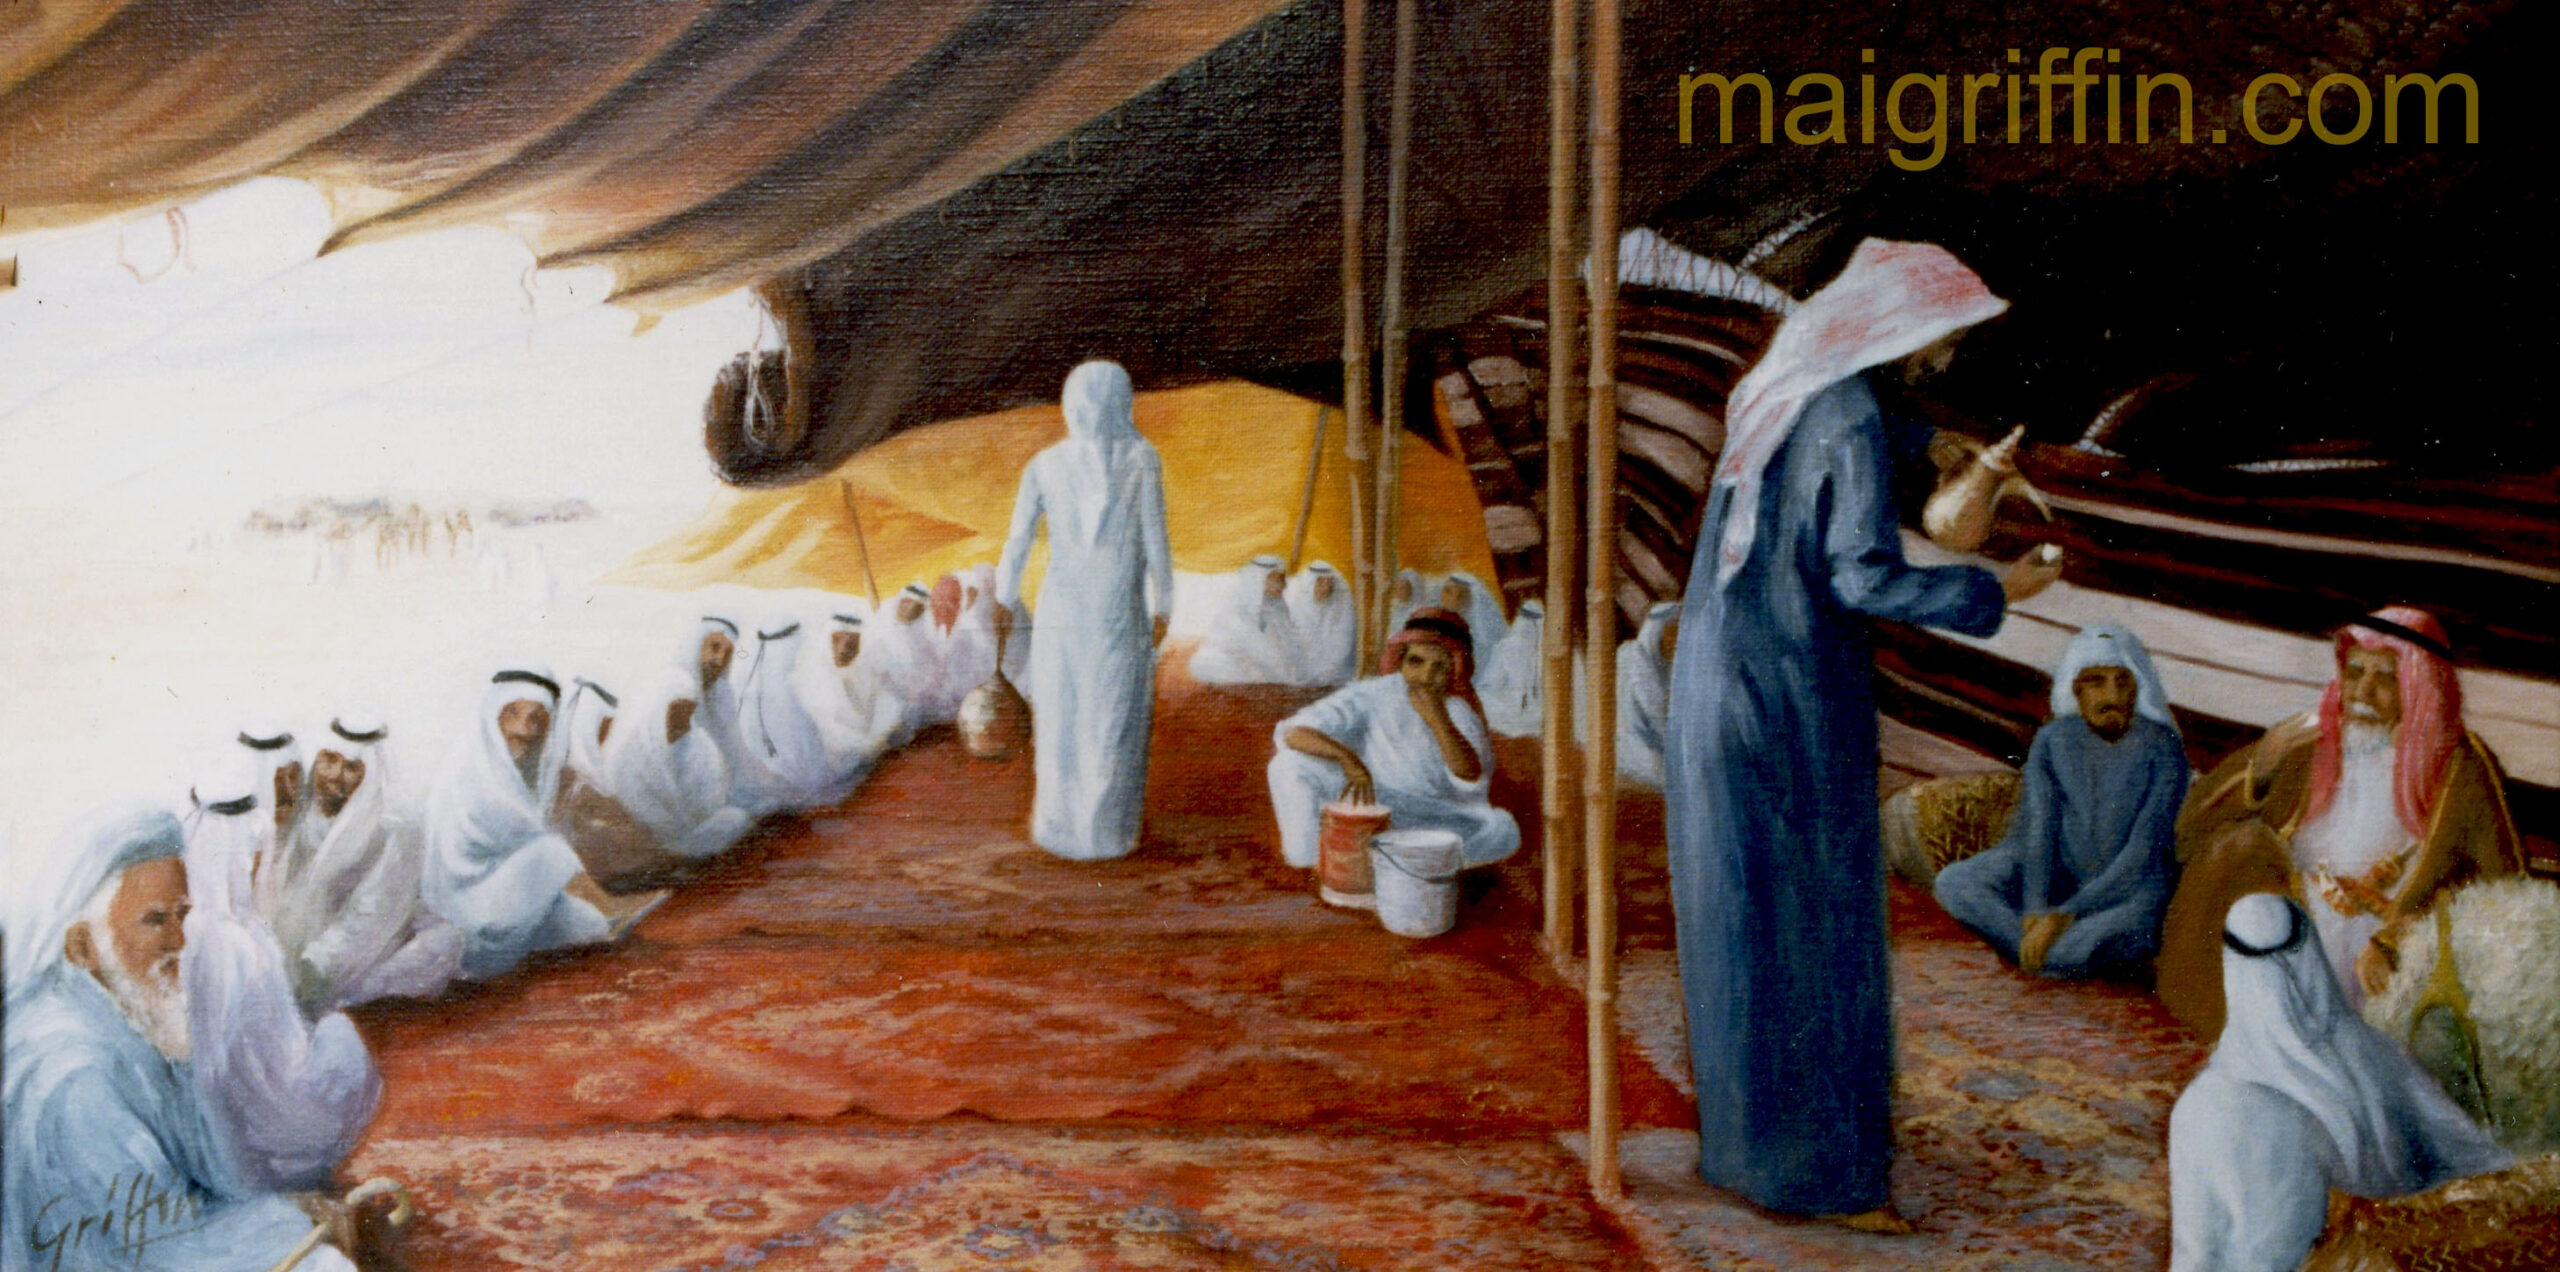 A Desert Tent - Qatar in the Eighties by Mai Griffin